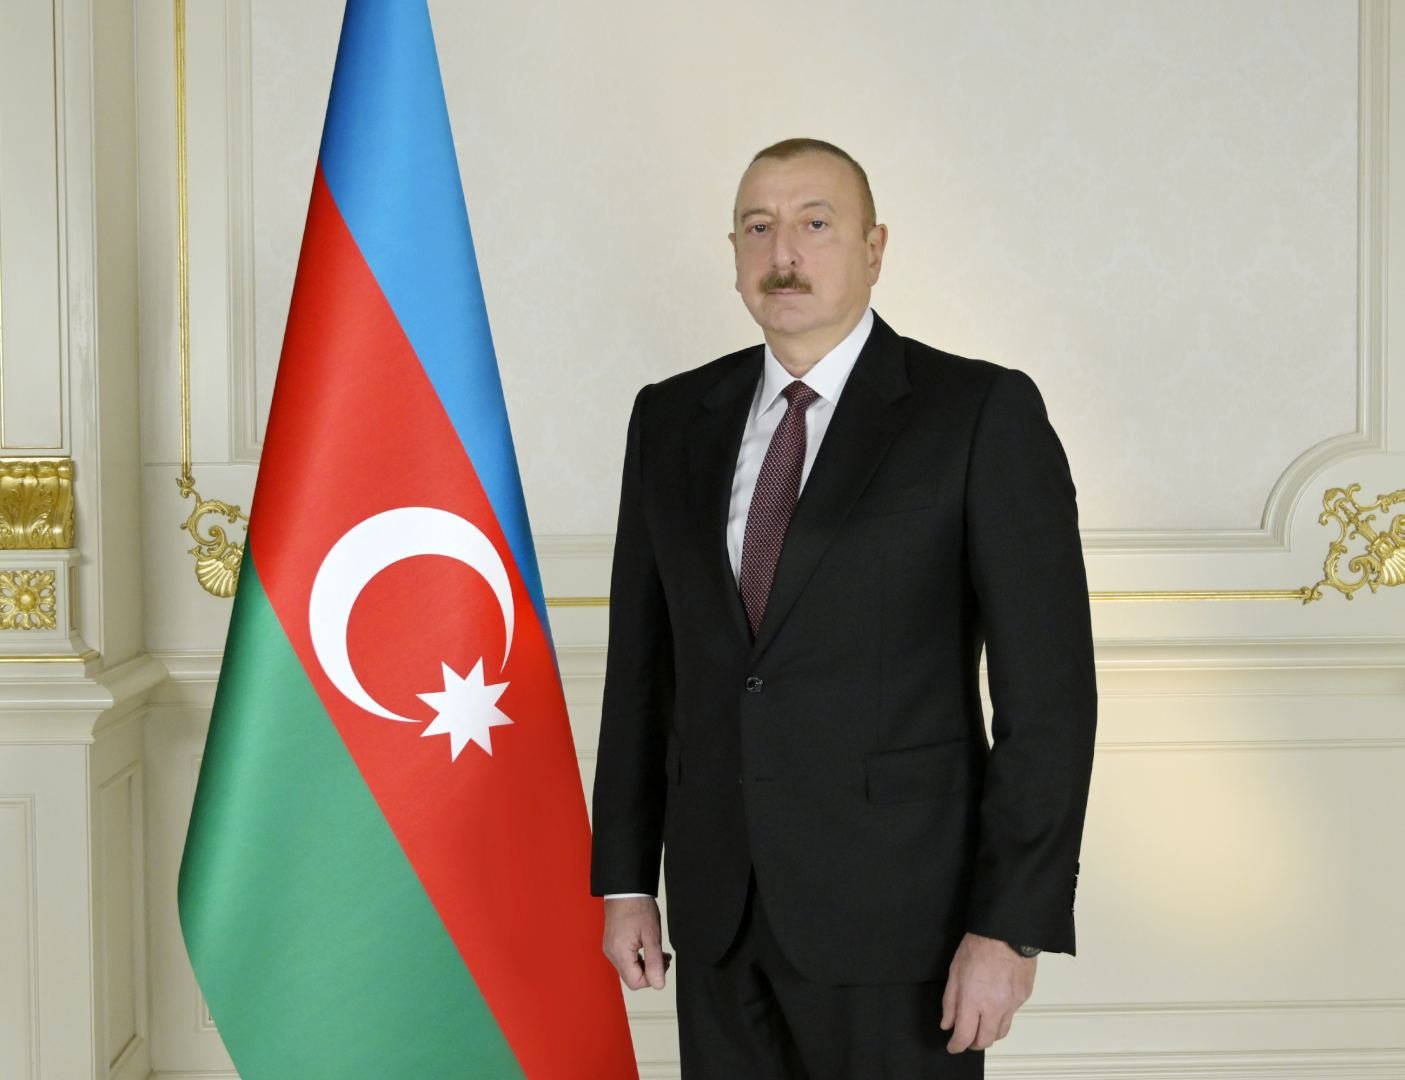 President Ilham Aliyev visits Martyrs' Memorial and the National Museum of Moudjahid in Algeria